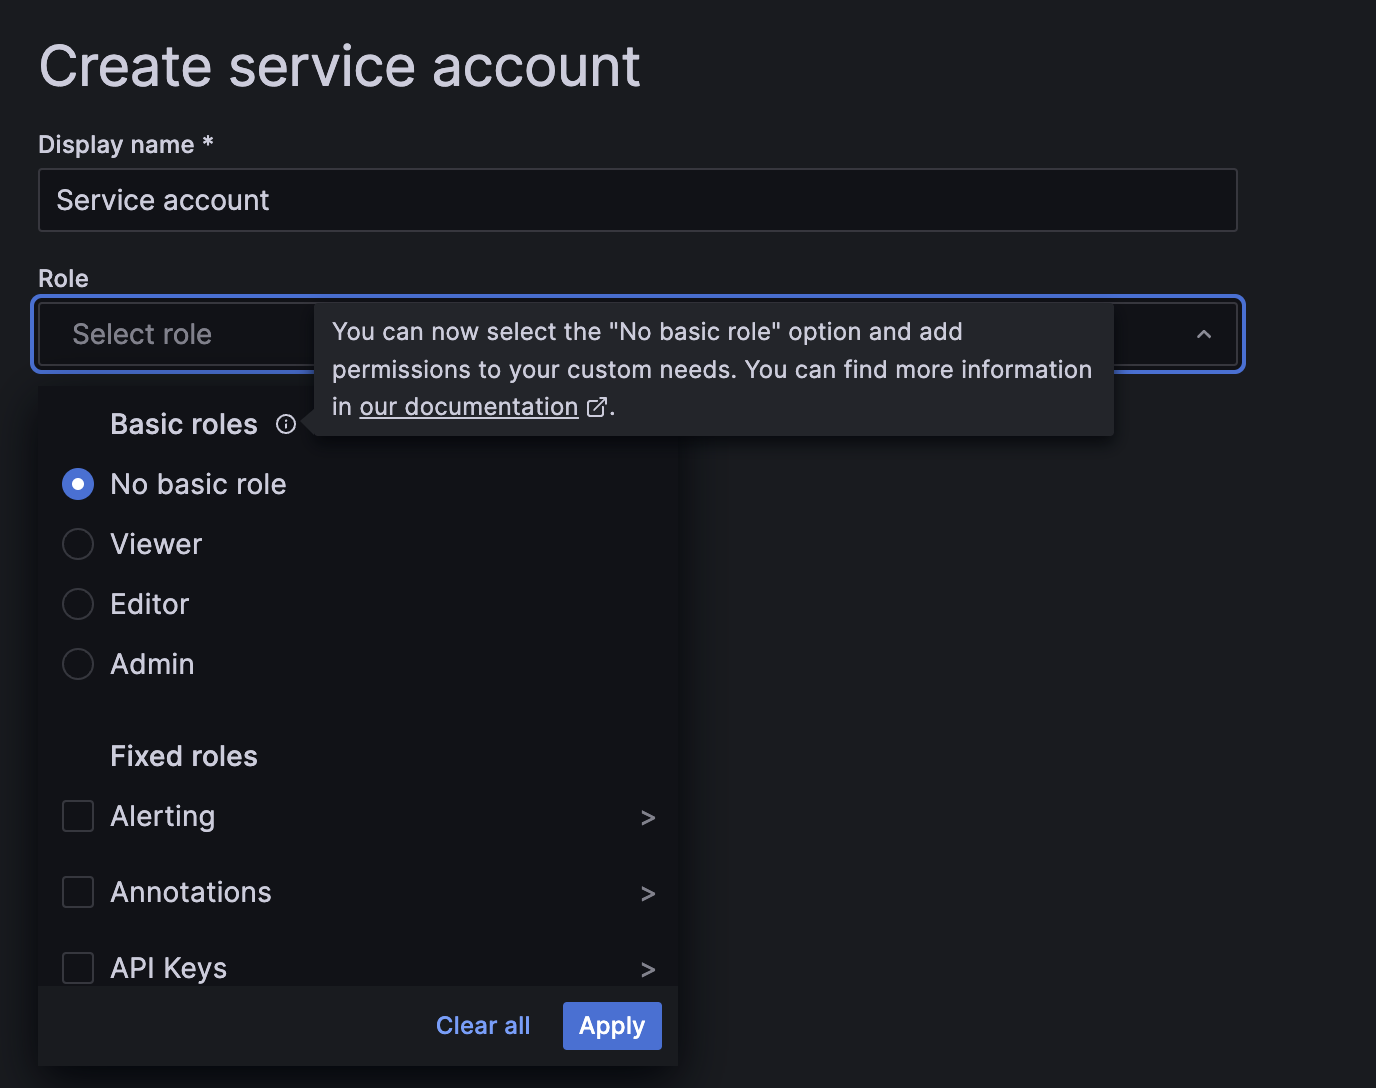 In this screenshot, No basic role is selected from the Create service account menu